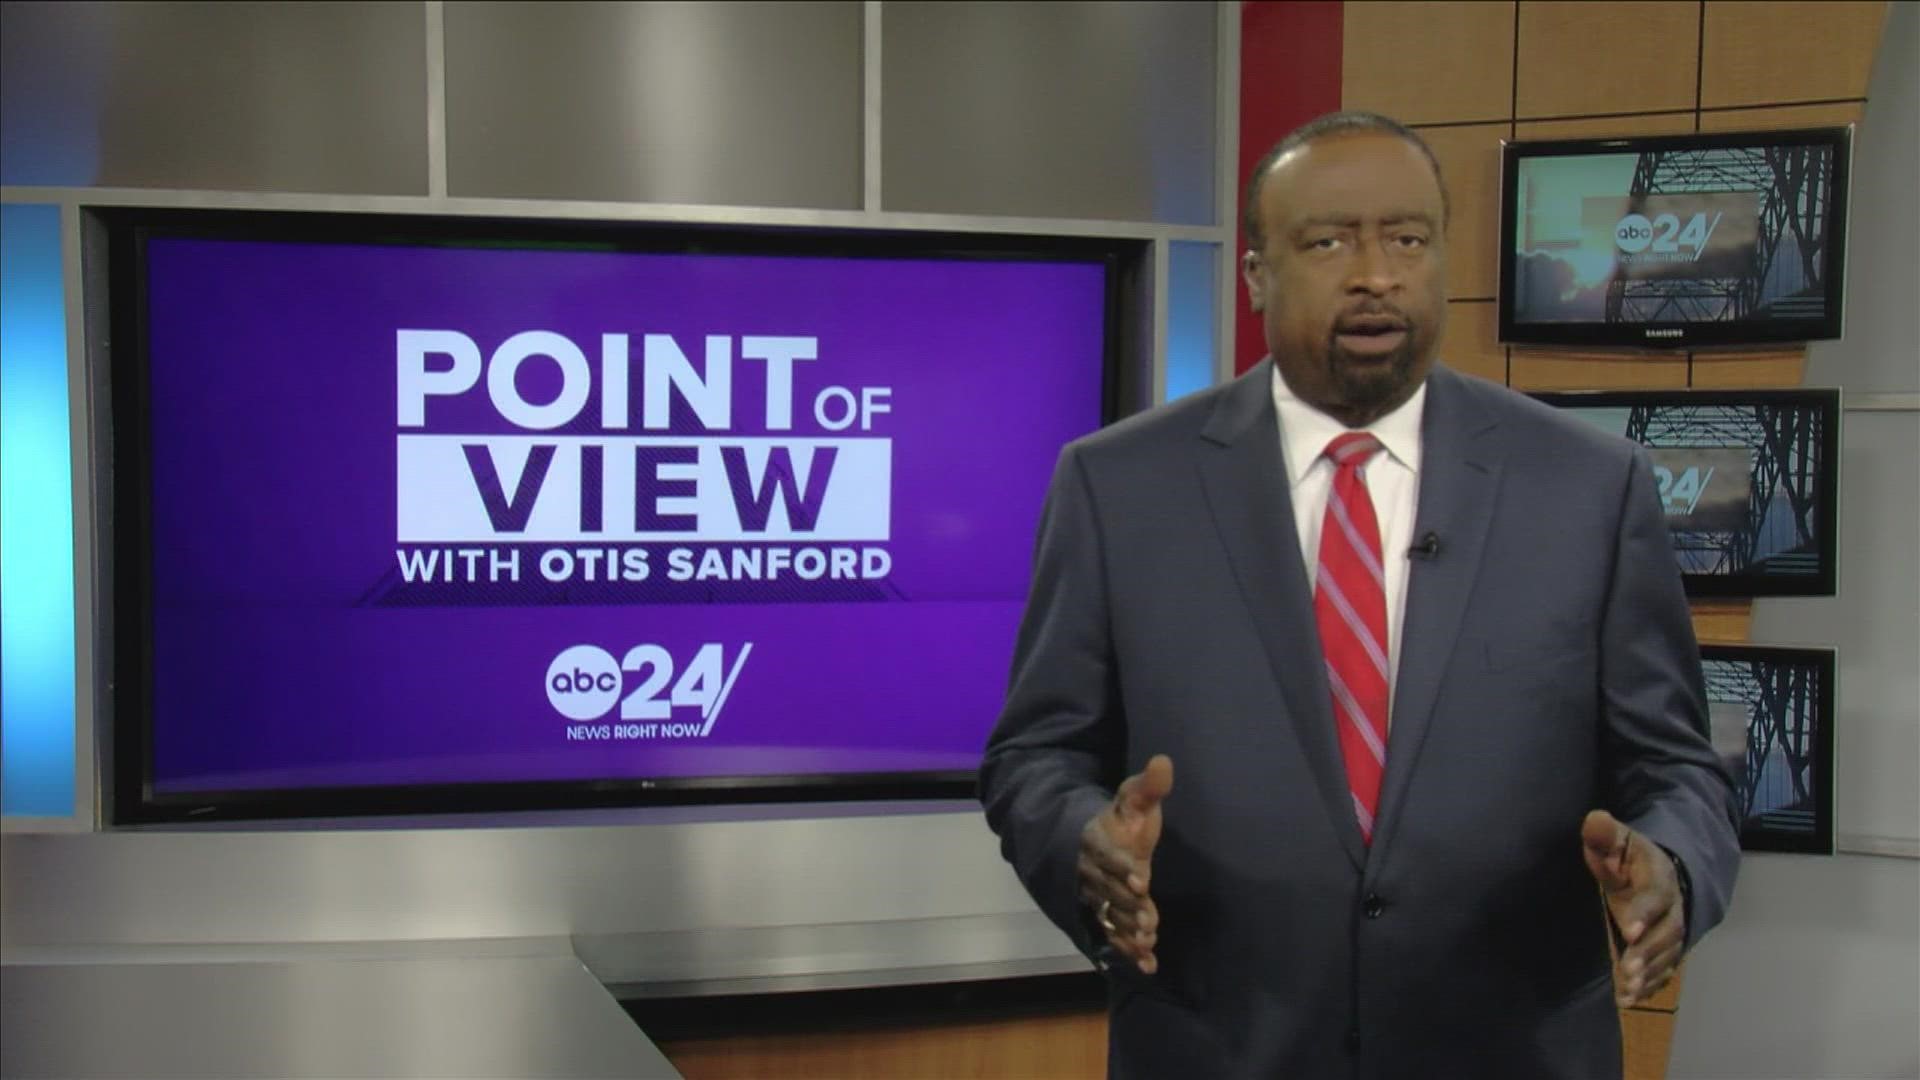 ABC24 political analyst and commentator Otis Sanford shared his point of view on a transparency bill on Tennessee campaign funding.